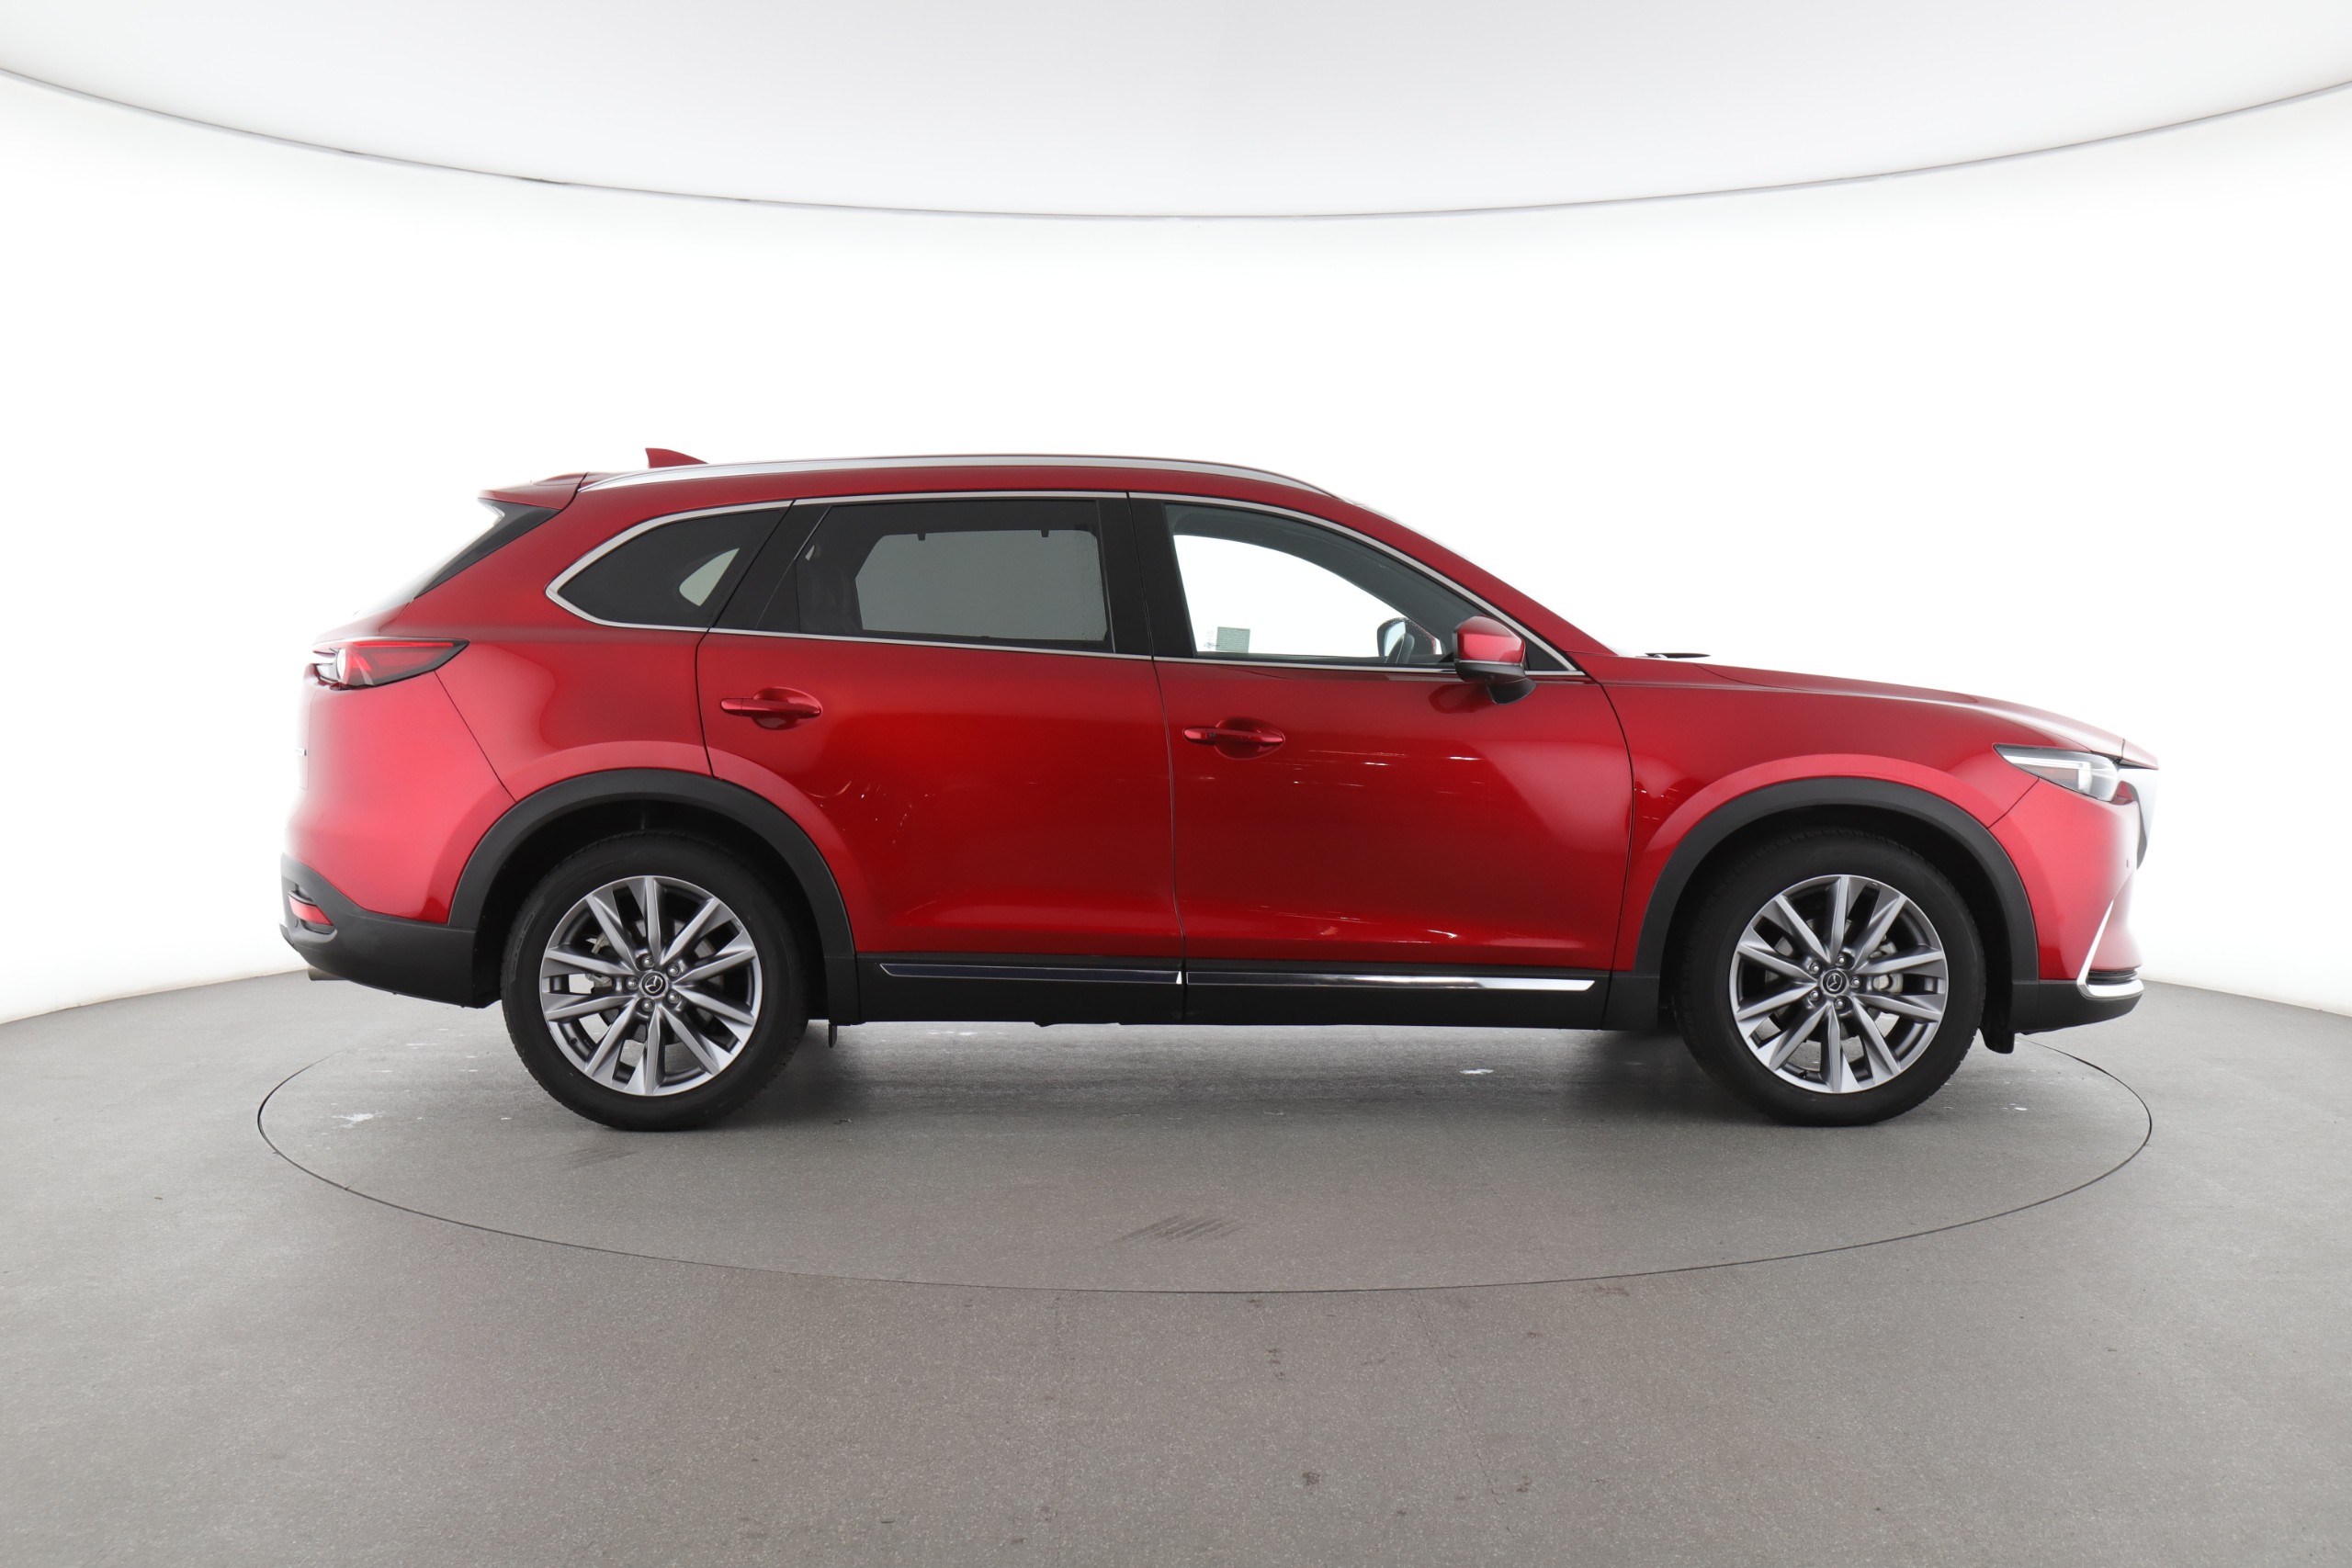 Mazda CX-9 Review: Is It a Good Suv? | Shift